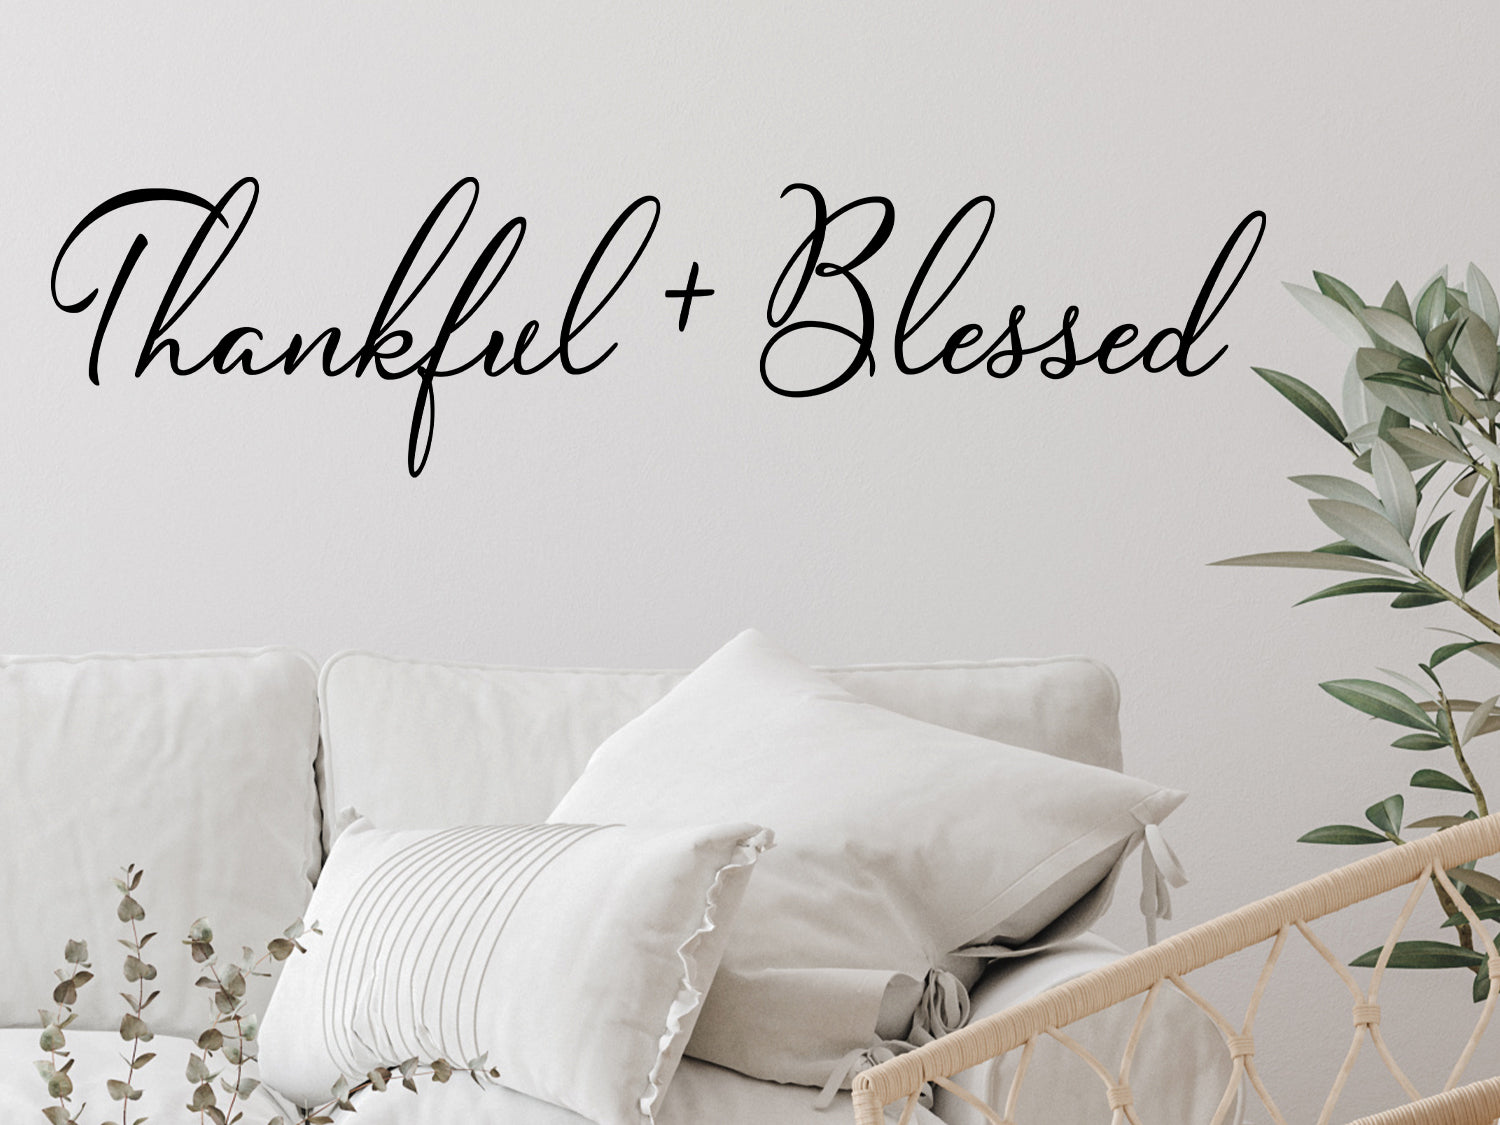 Thankful and Blessed Vinyl Decal Sticker, Decal for Wood Signs